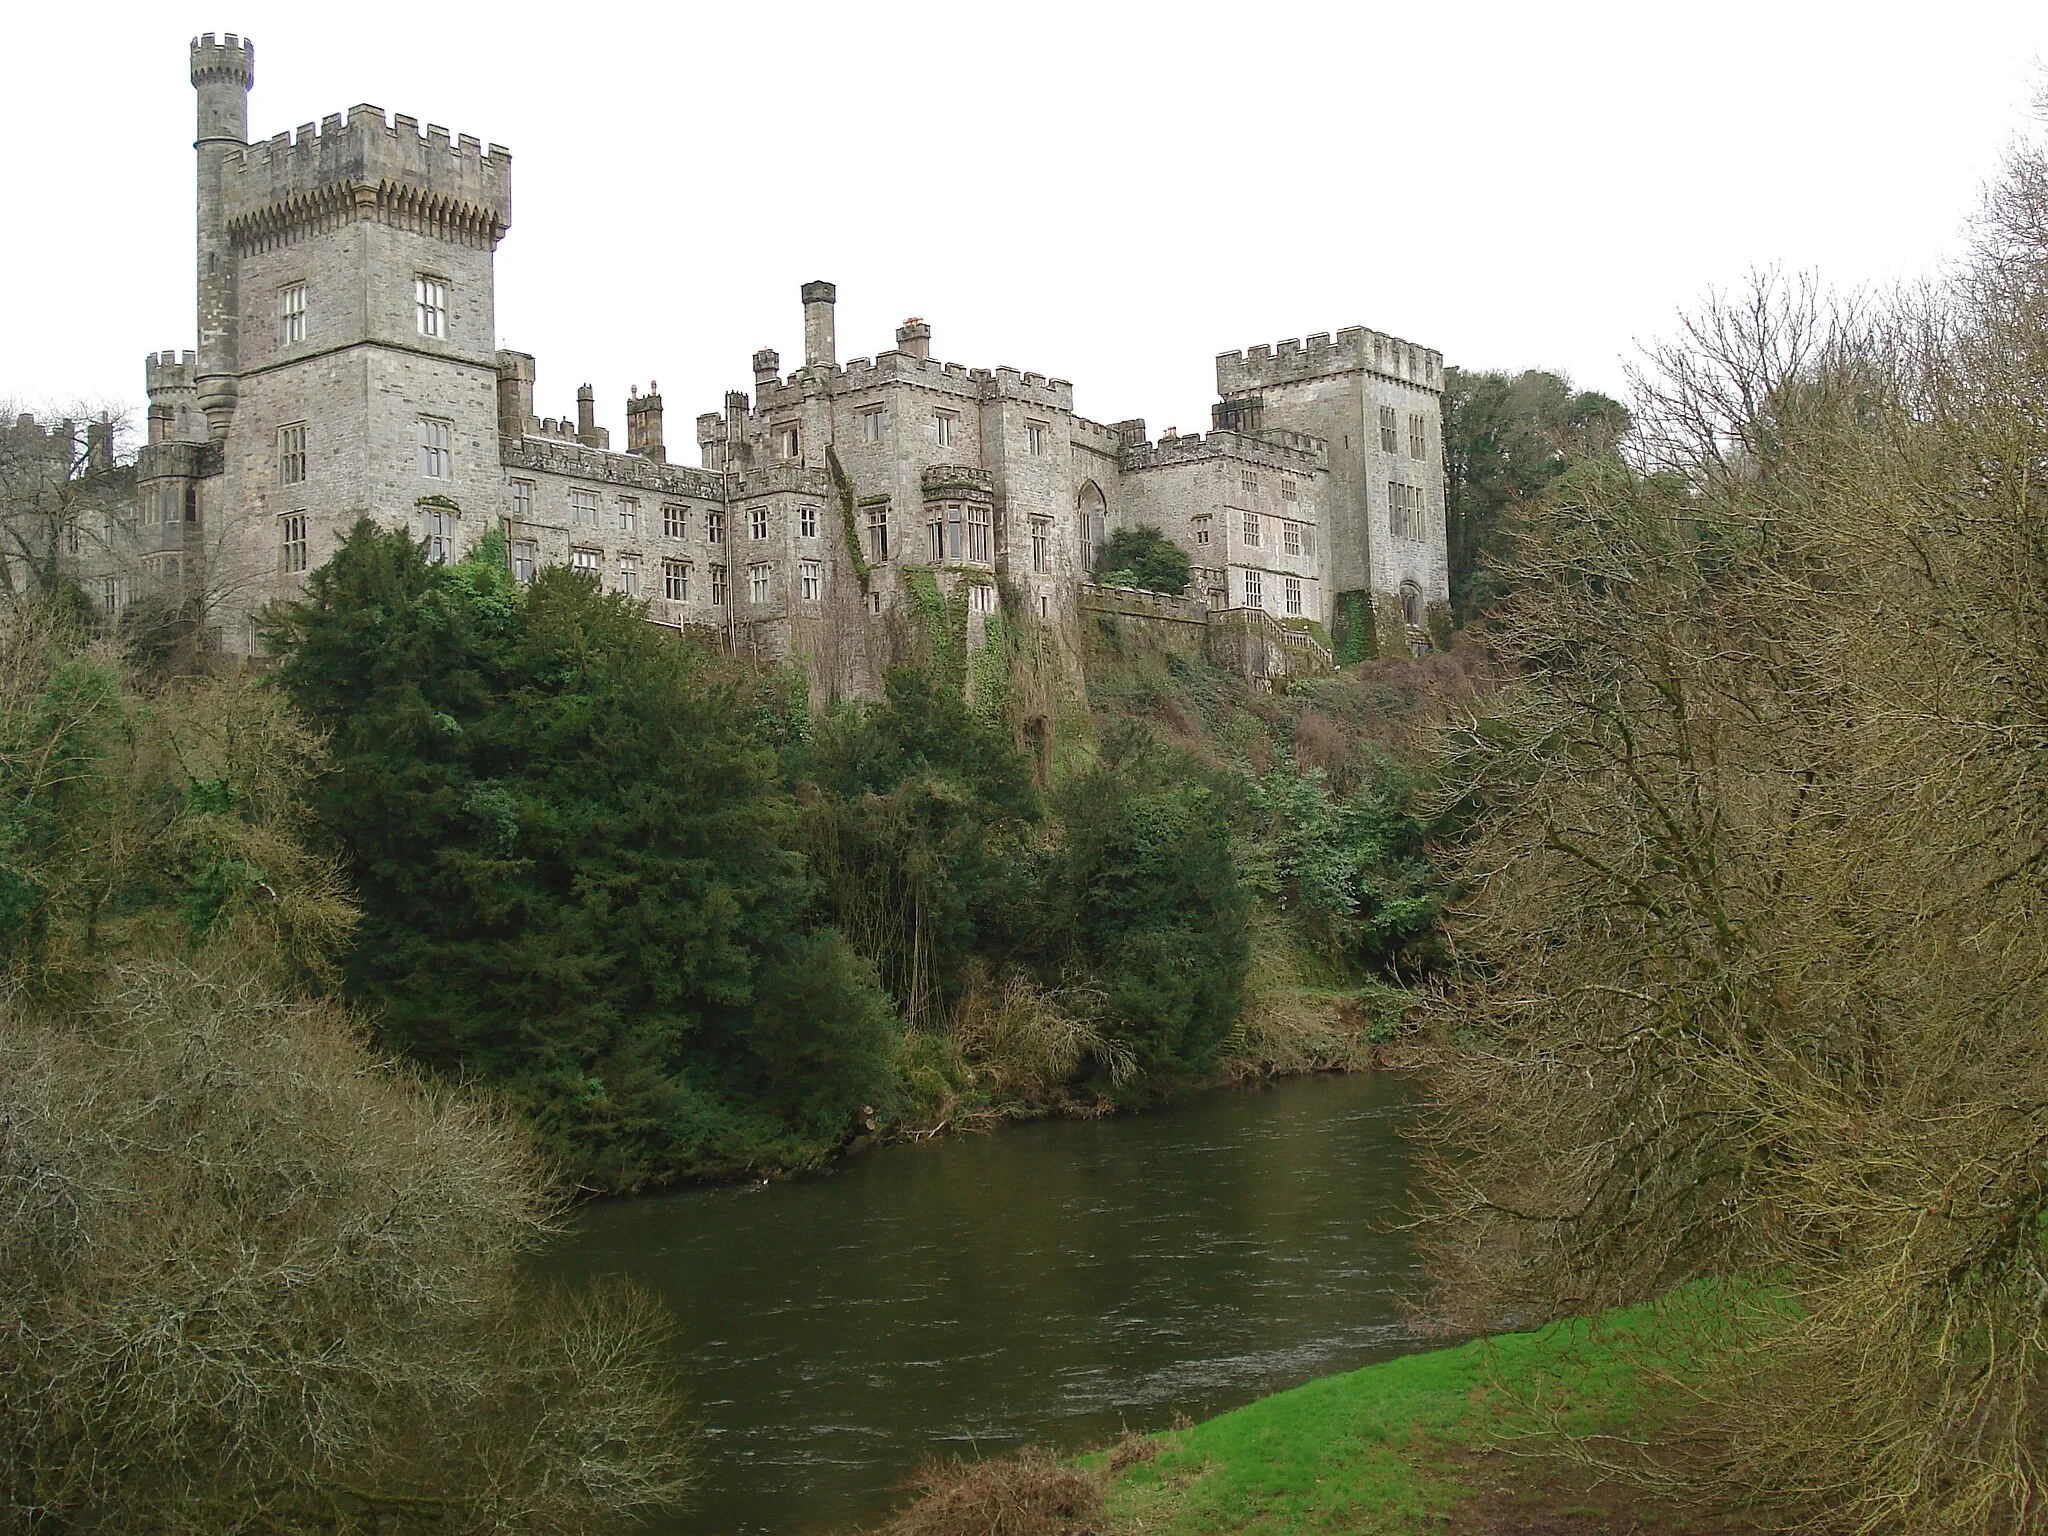 Photo showing: Lismore Castle, located in the town of Lismore, in County Waterford, Ireland